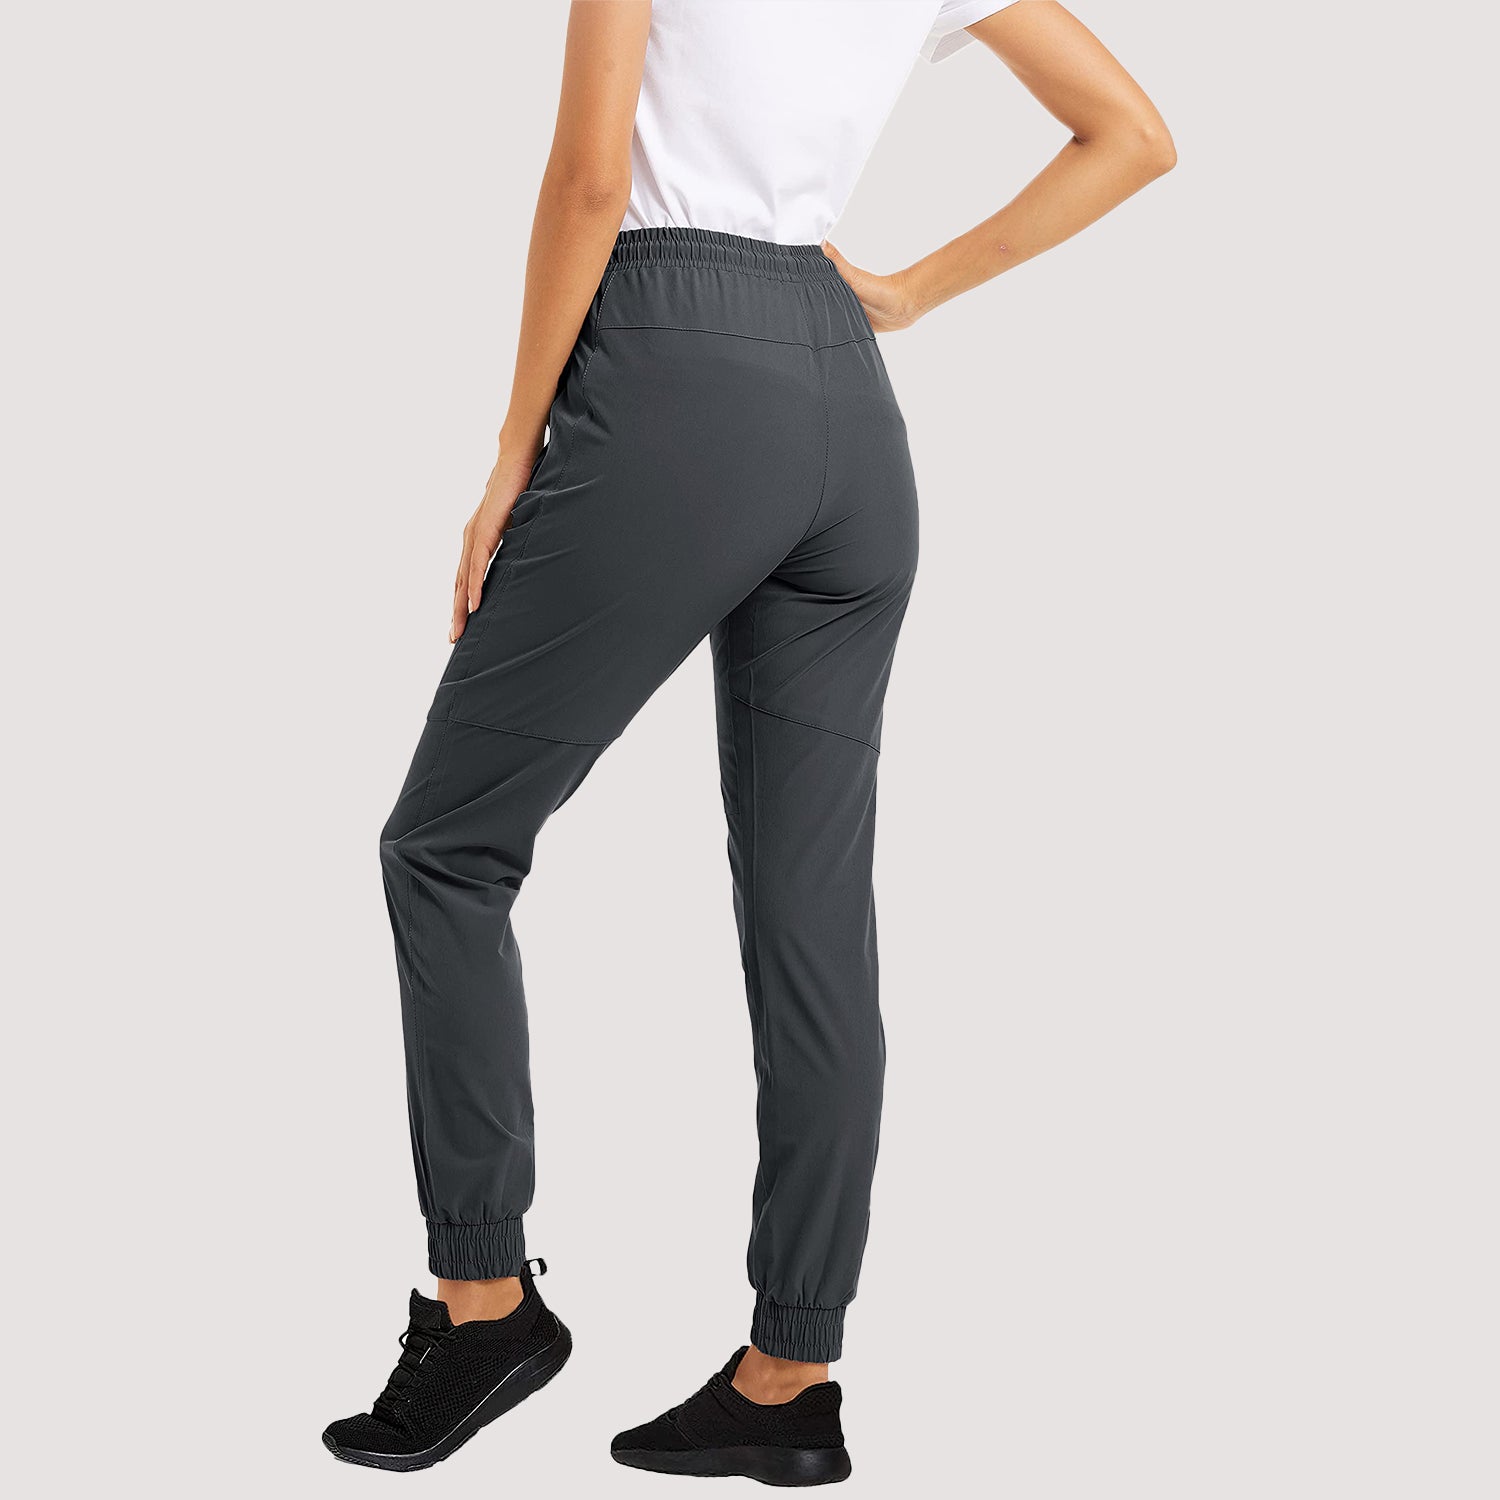 Women's Quick Dry Joggers Running Pants with 2 Zipper Pockets